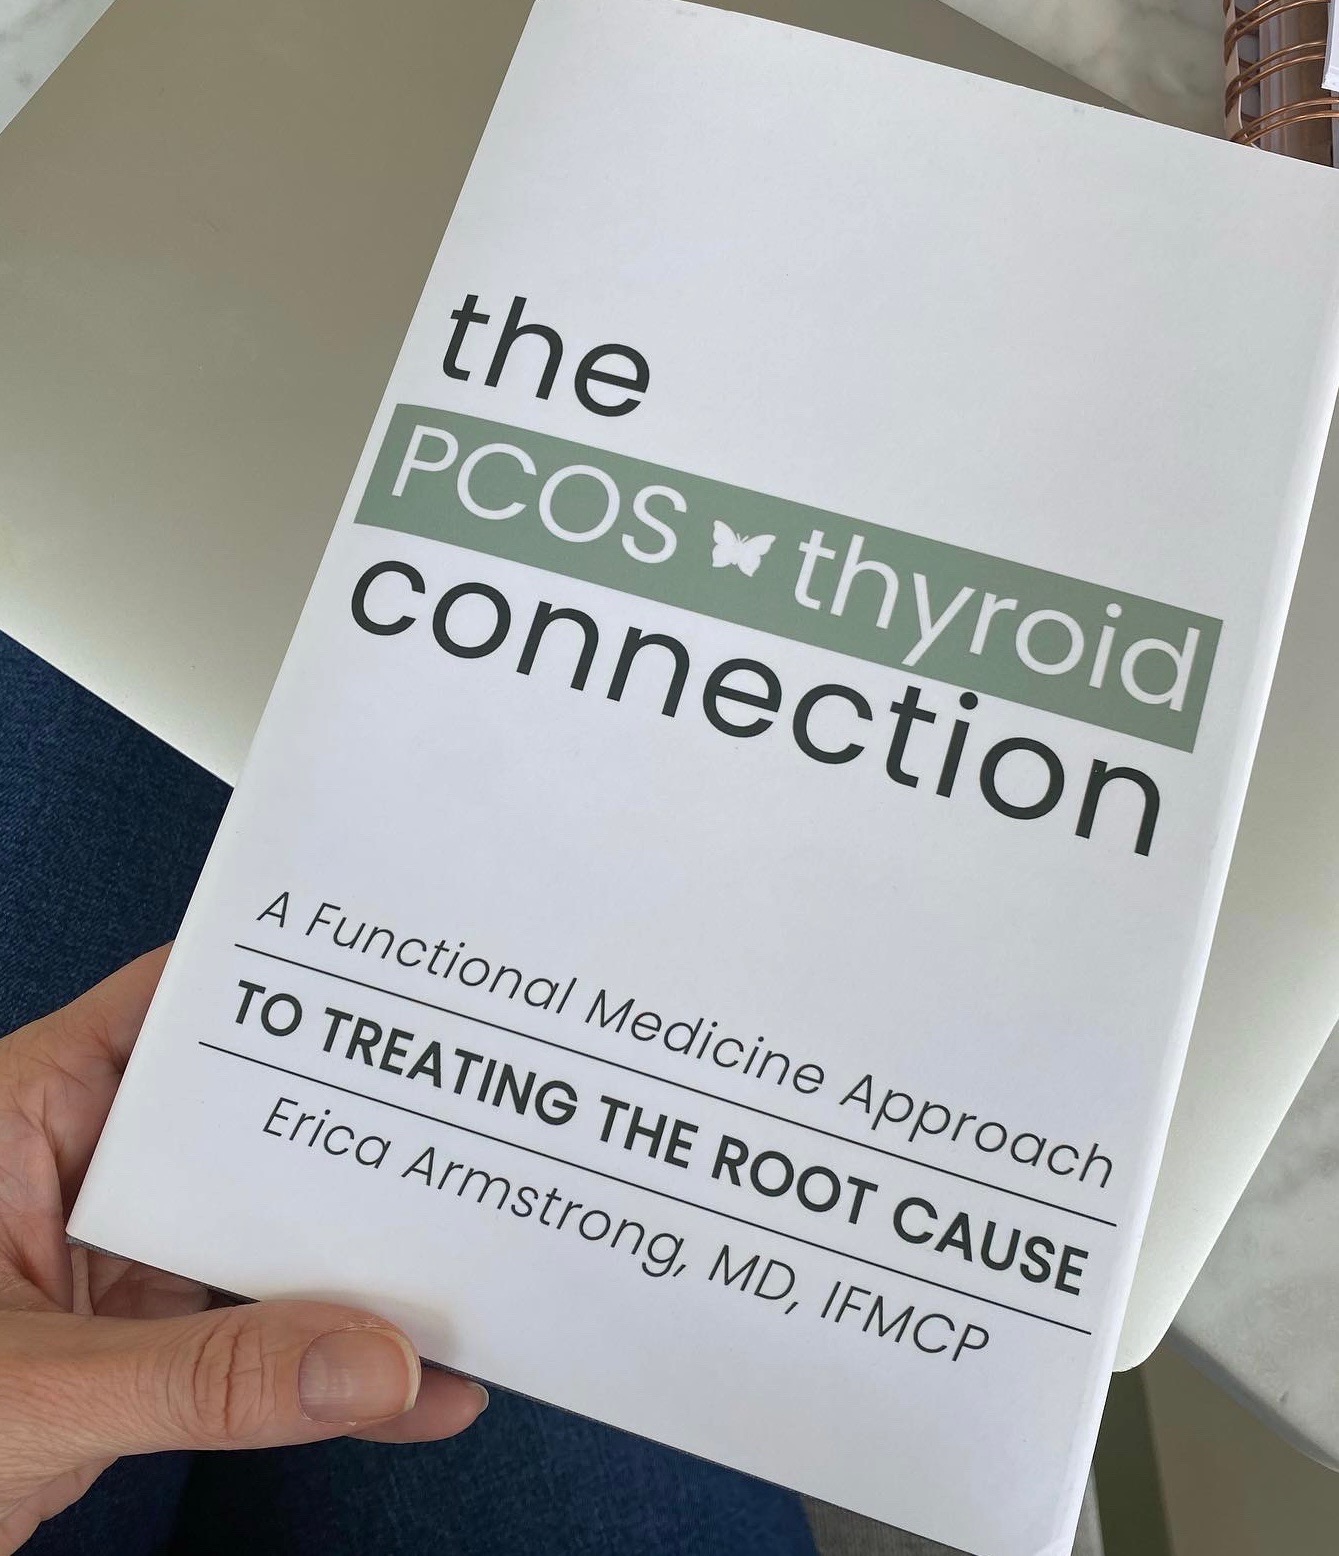 The PCOS Thyroid Connection Book